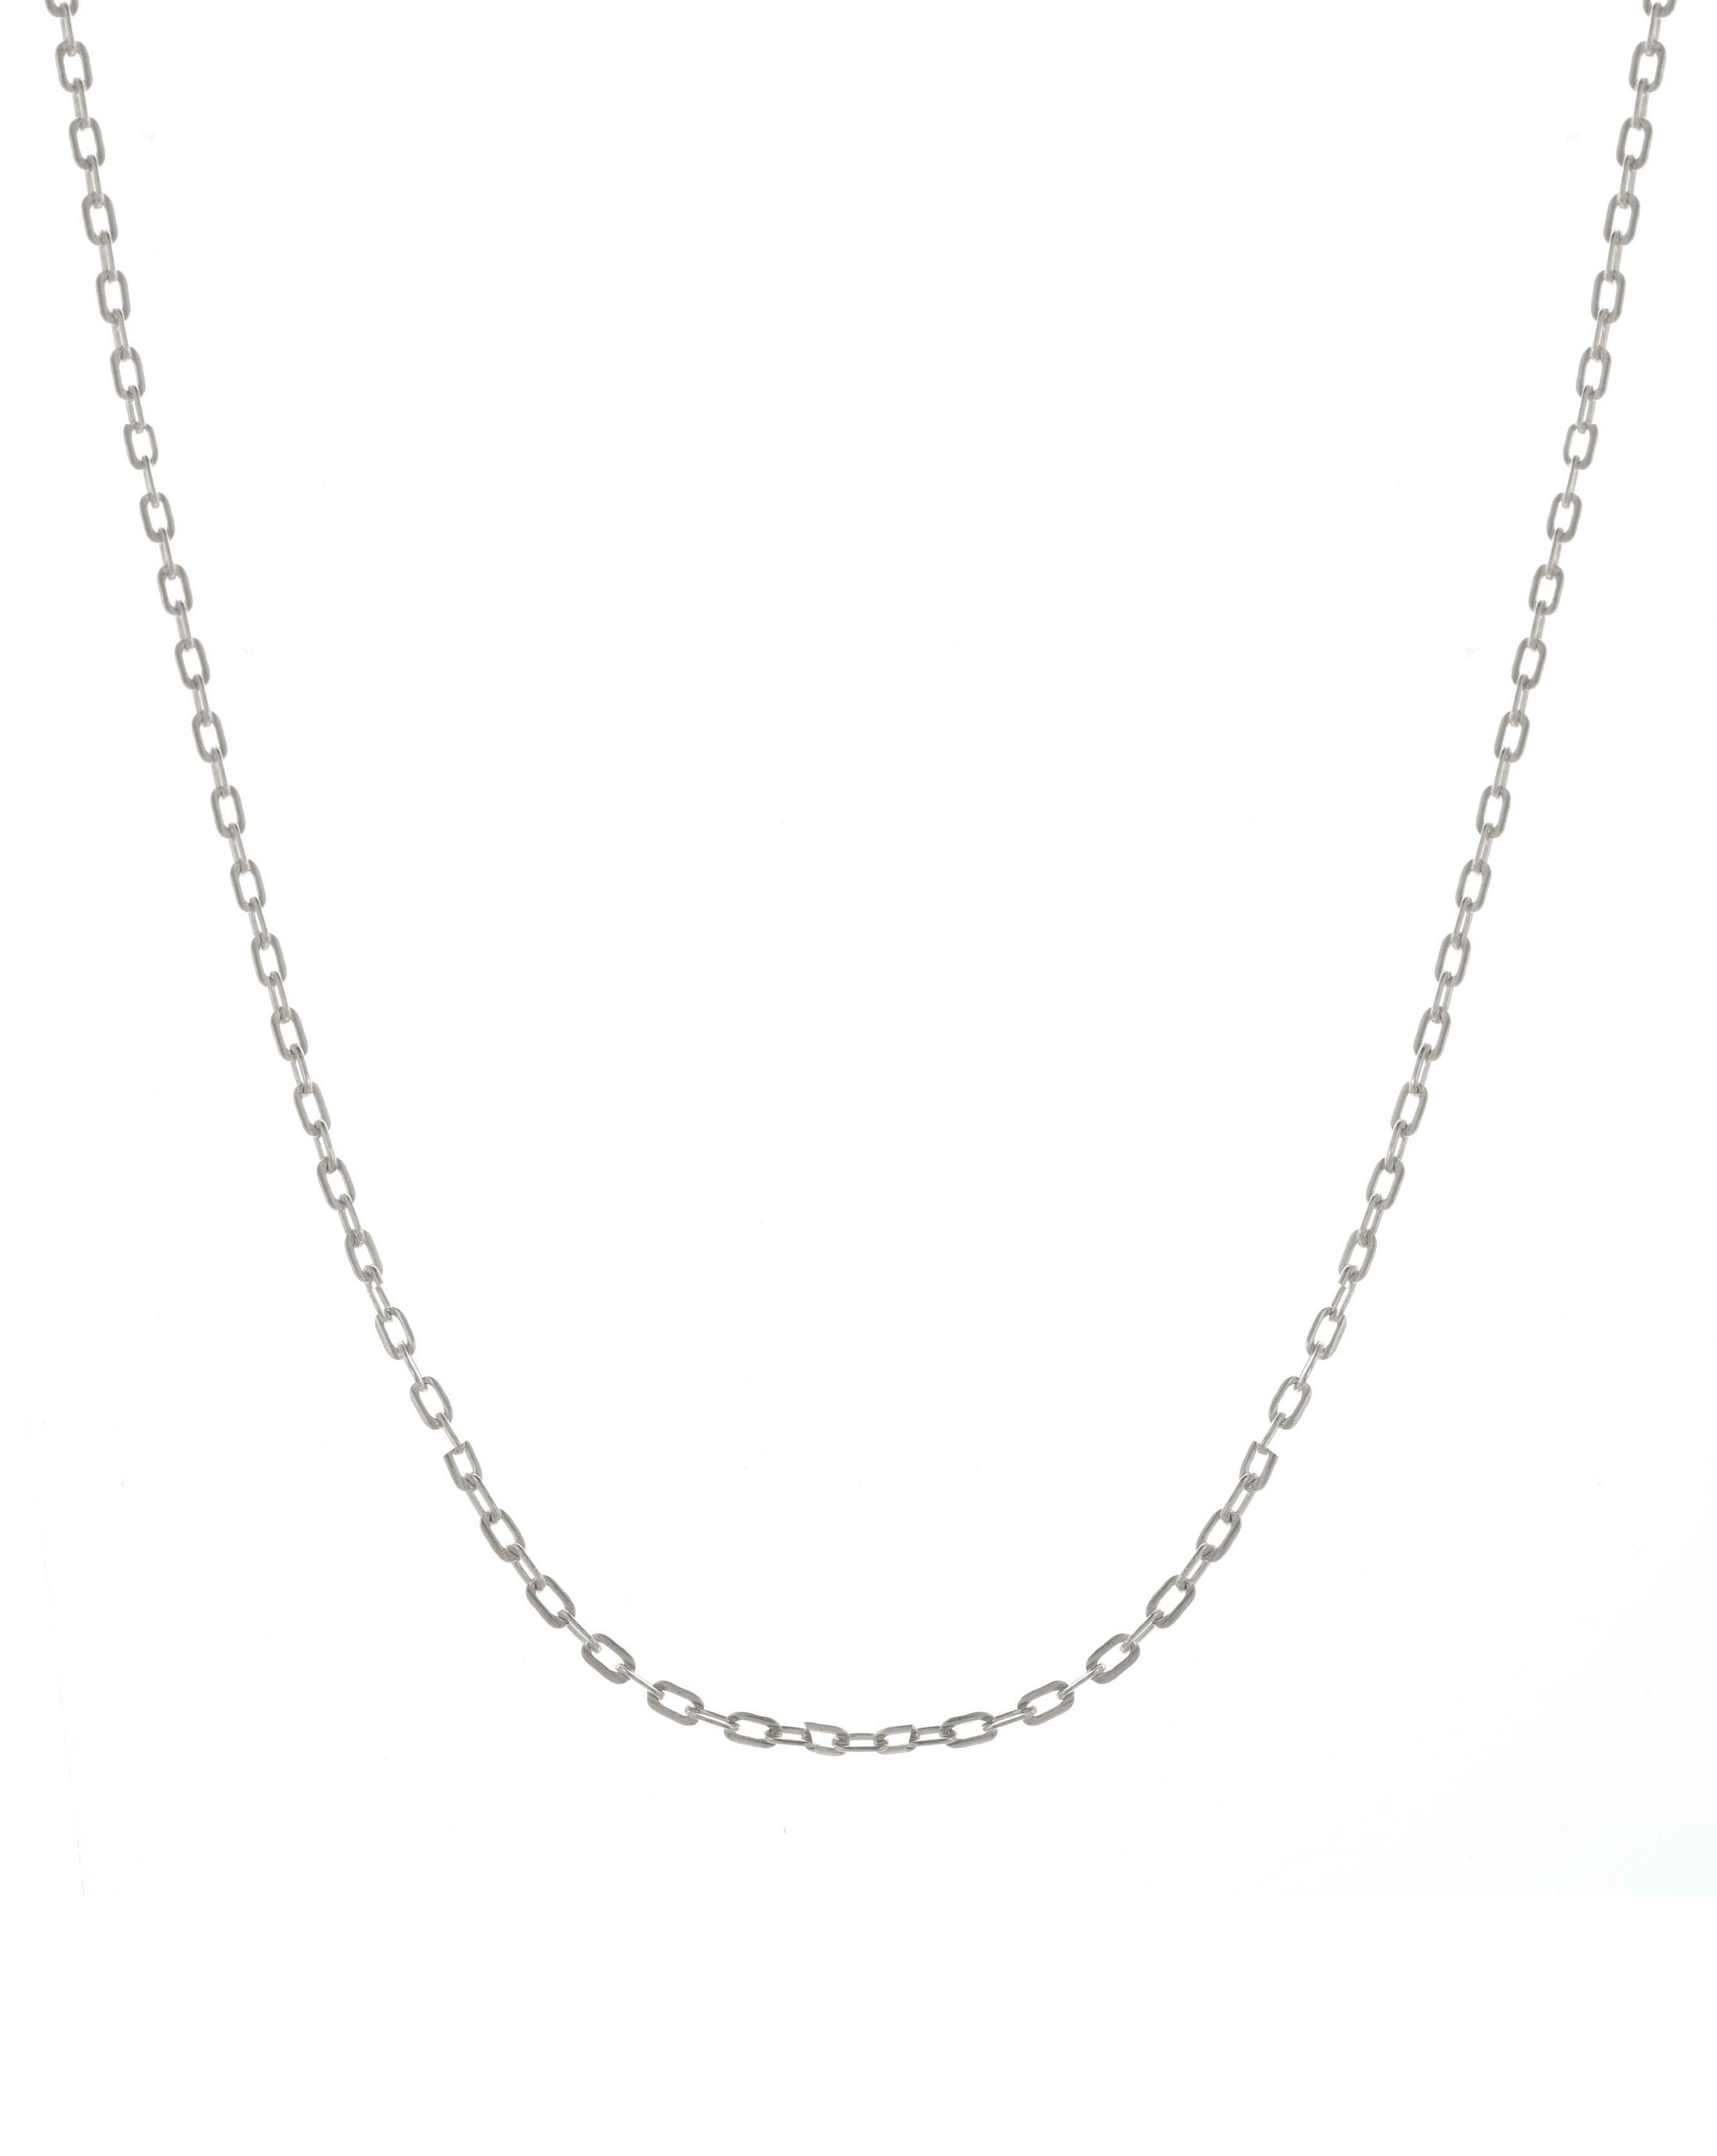 Garla Necklace by KOZAKH. A 14 to 16 inch adjustable length necklace in Sterling Silver.